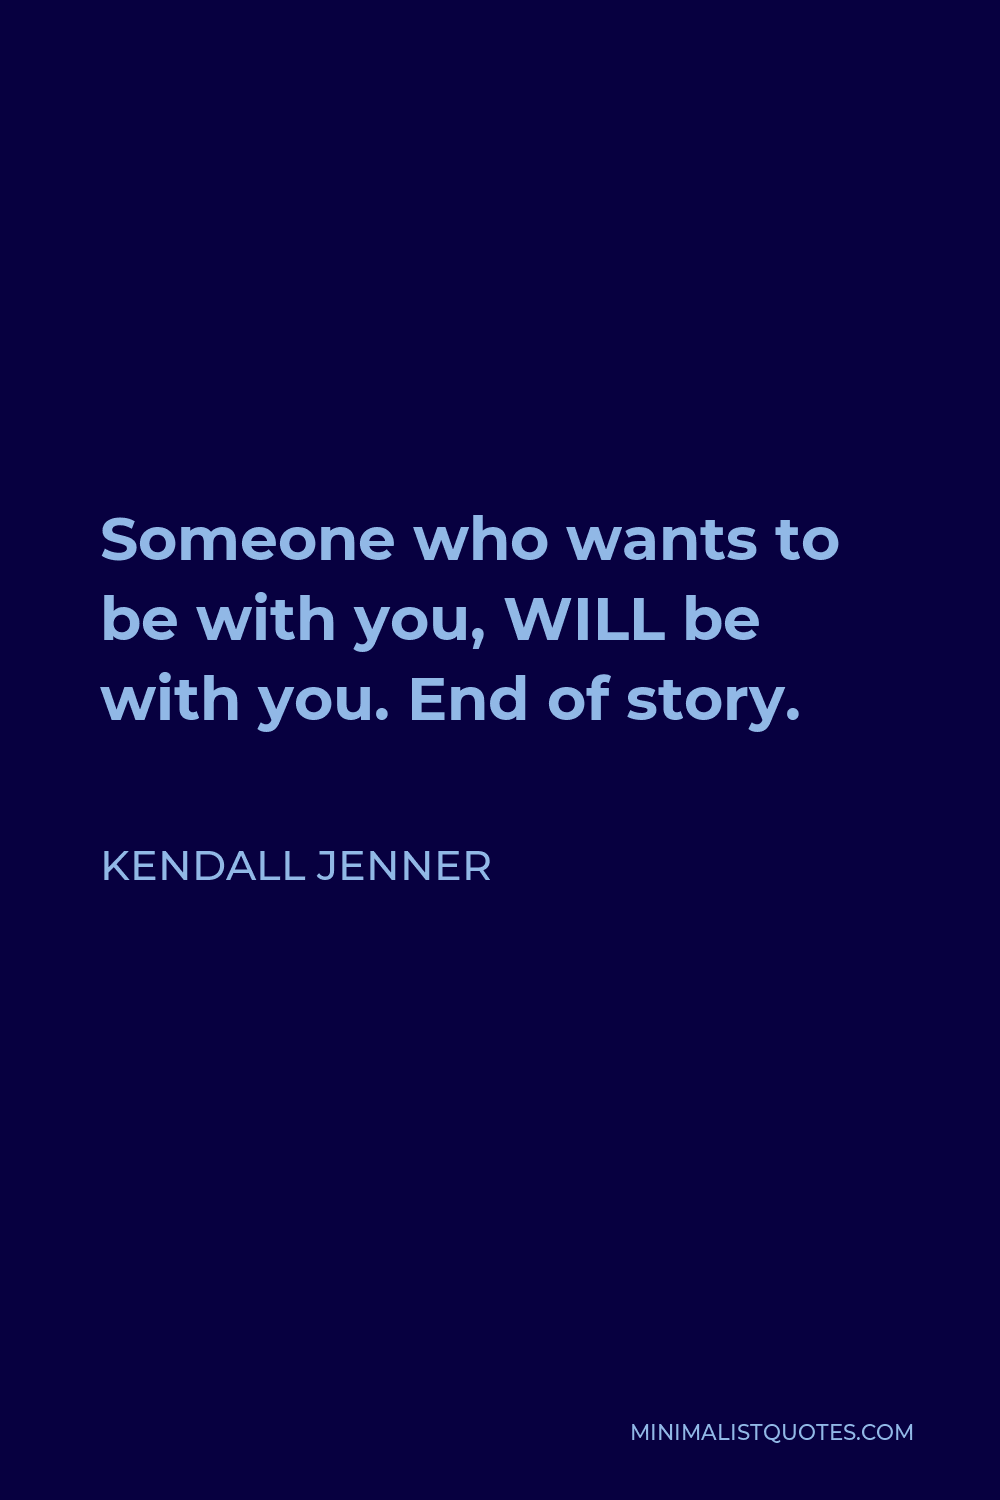 Kendall Jenner Quote - Someone who wants to be with you, WILL be with you. End of story.